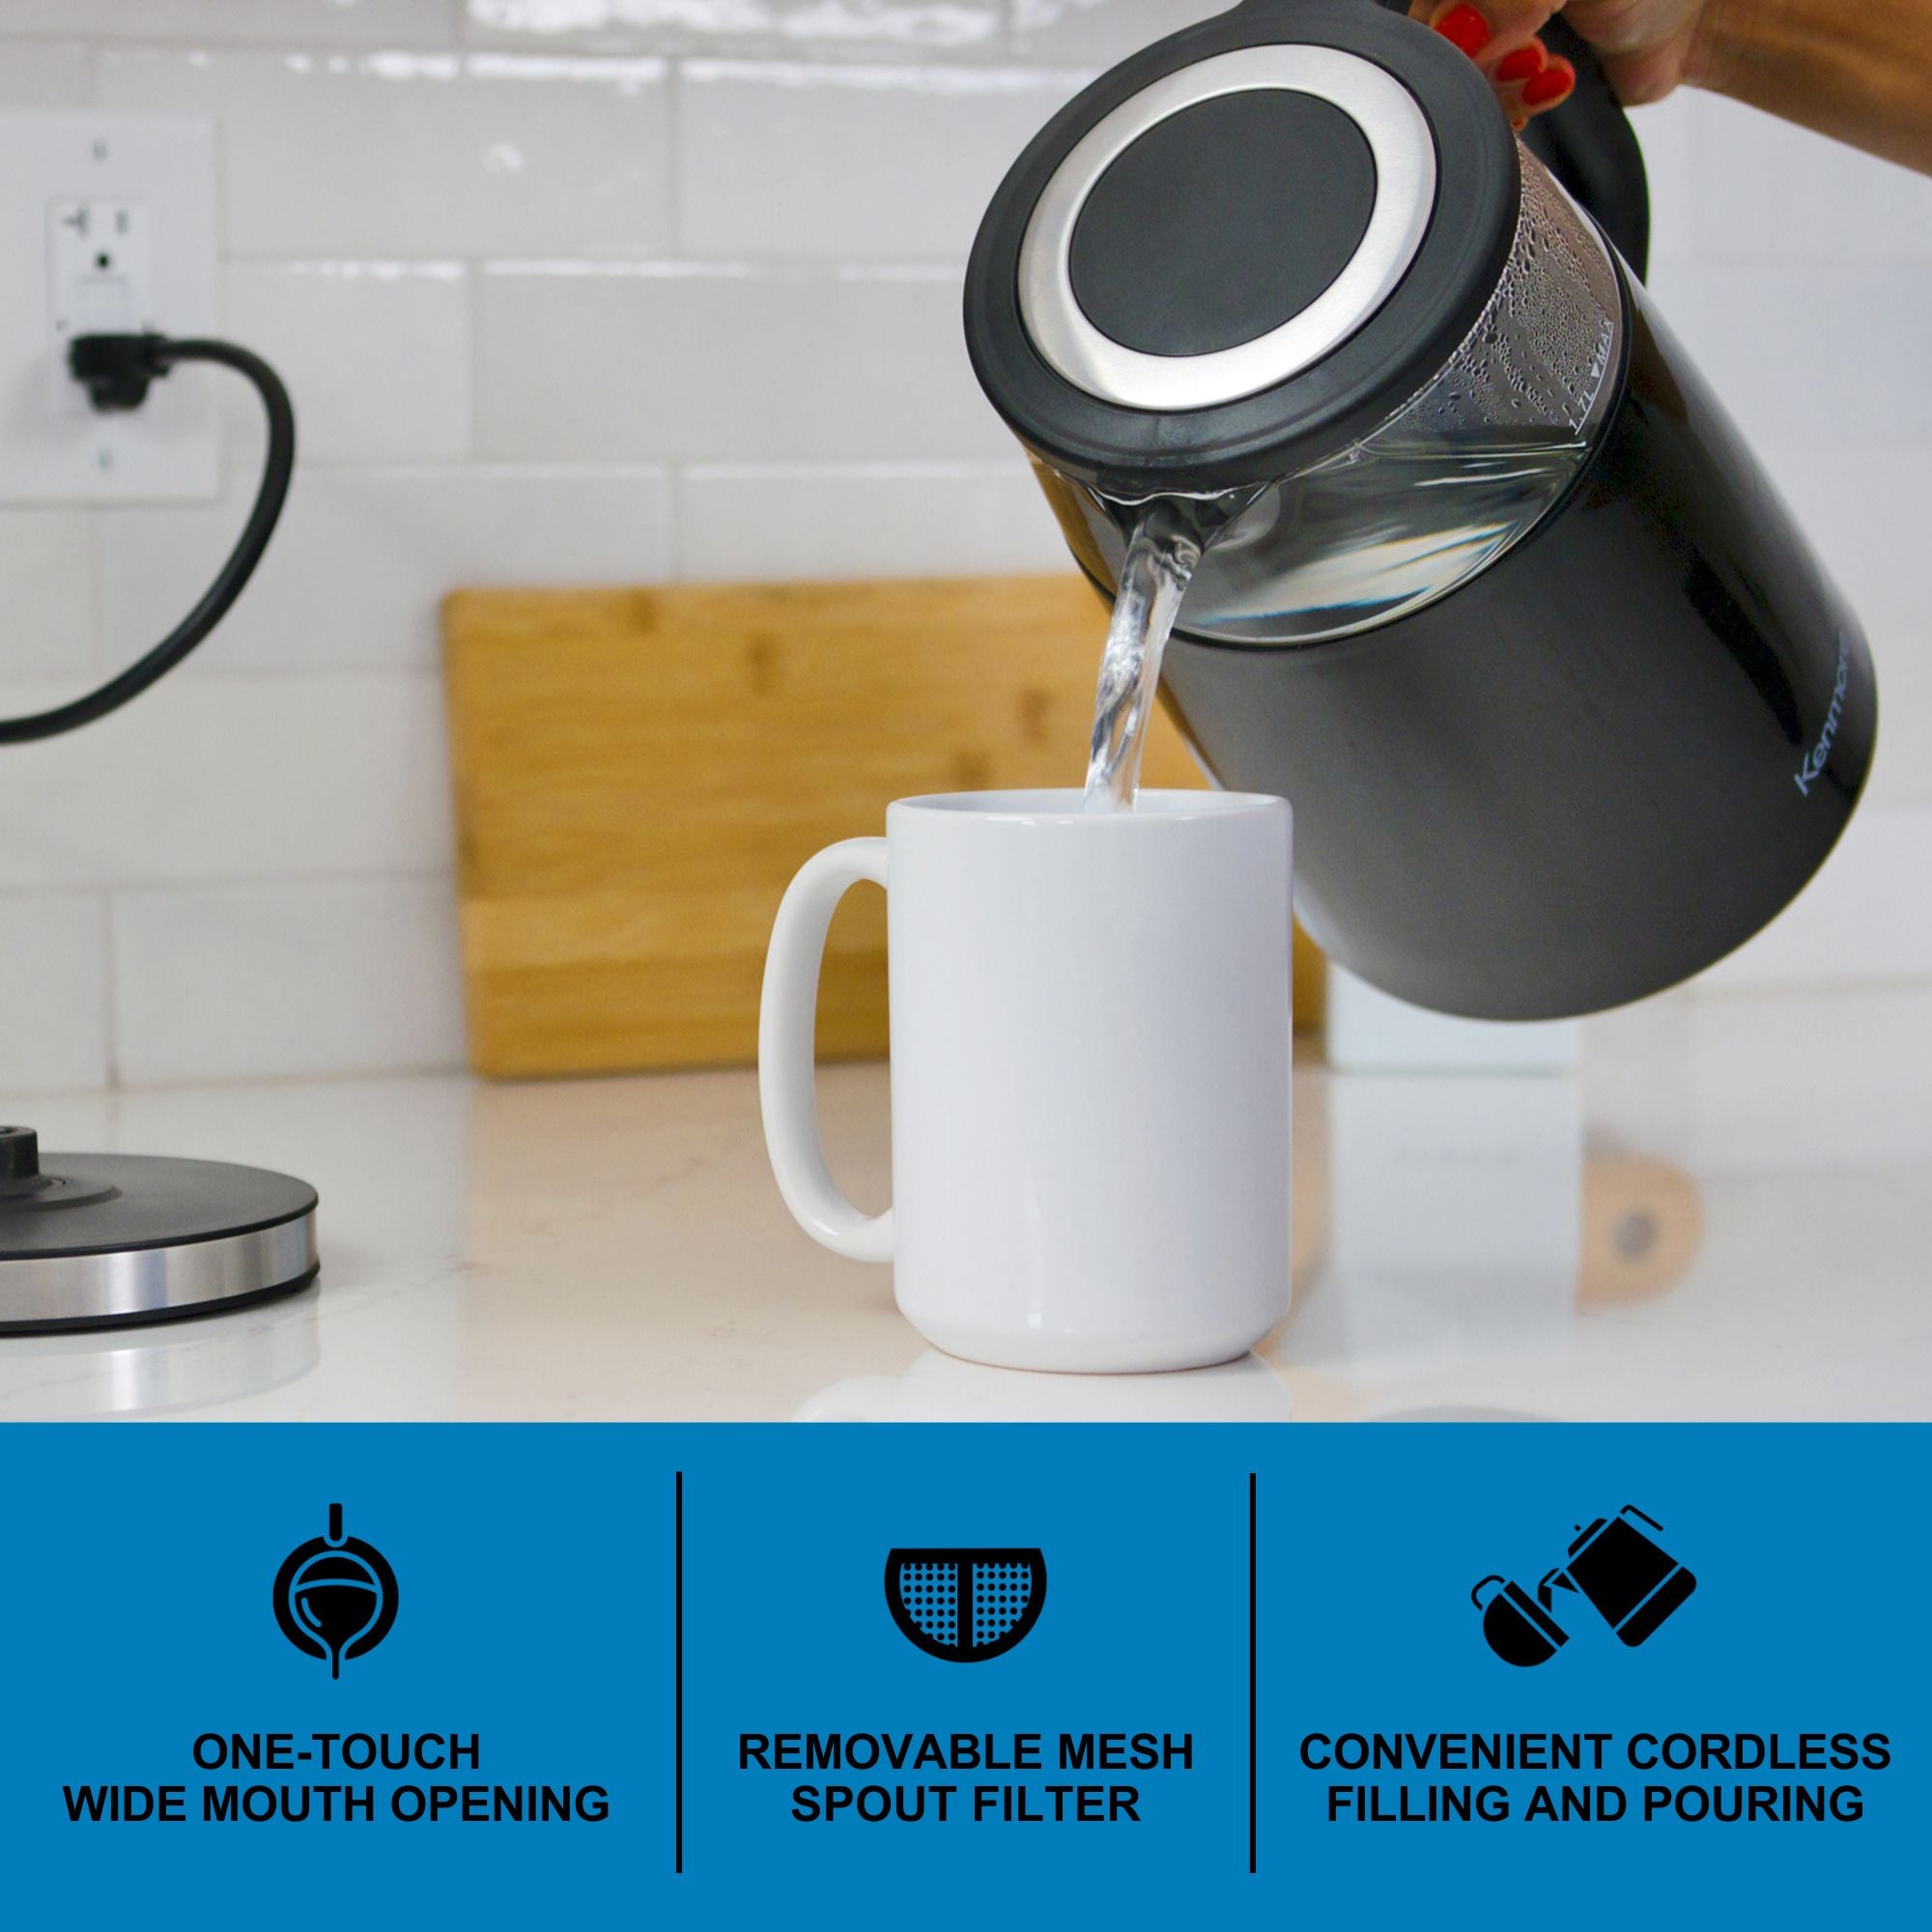 A person's hand holding the Kenmore programmable glass kettle and pouring hot water into a white mug. Text and icons below describe features: One-touch wide mouth opening; removable mesh spout filter; convenient cordless filling and pouring